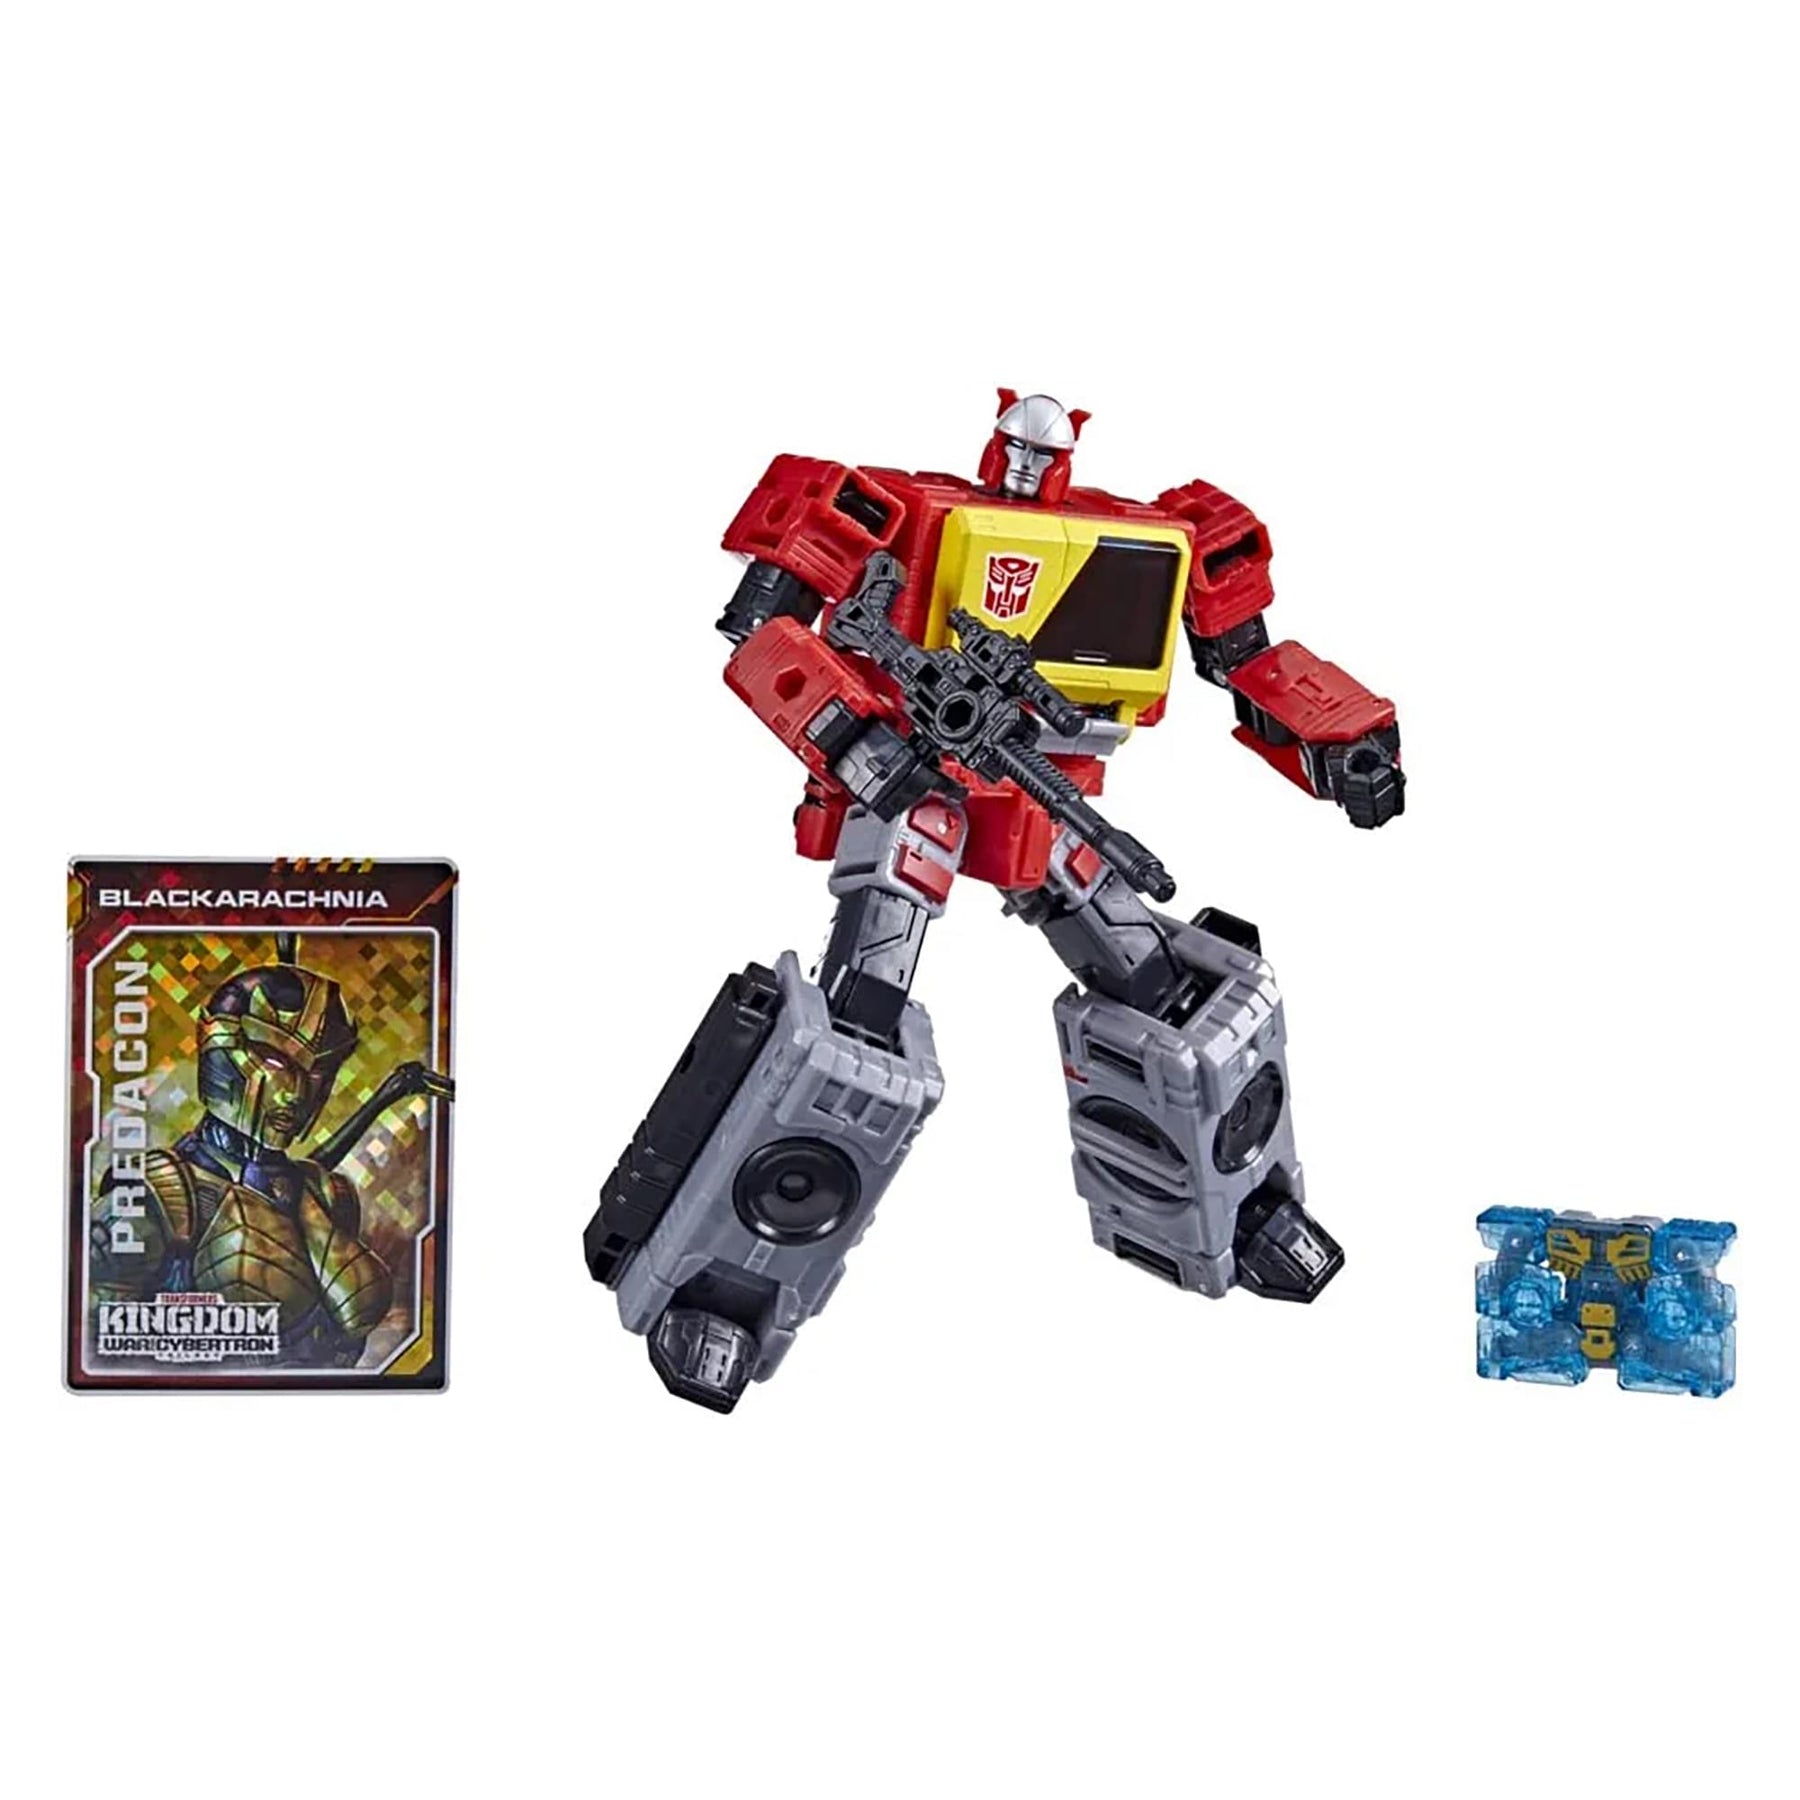 Transformers Generations War for Cybertron Kingdom | Autobot Blaster & Eject